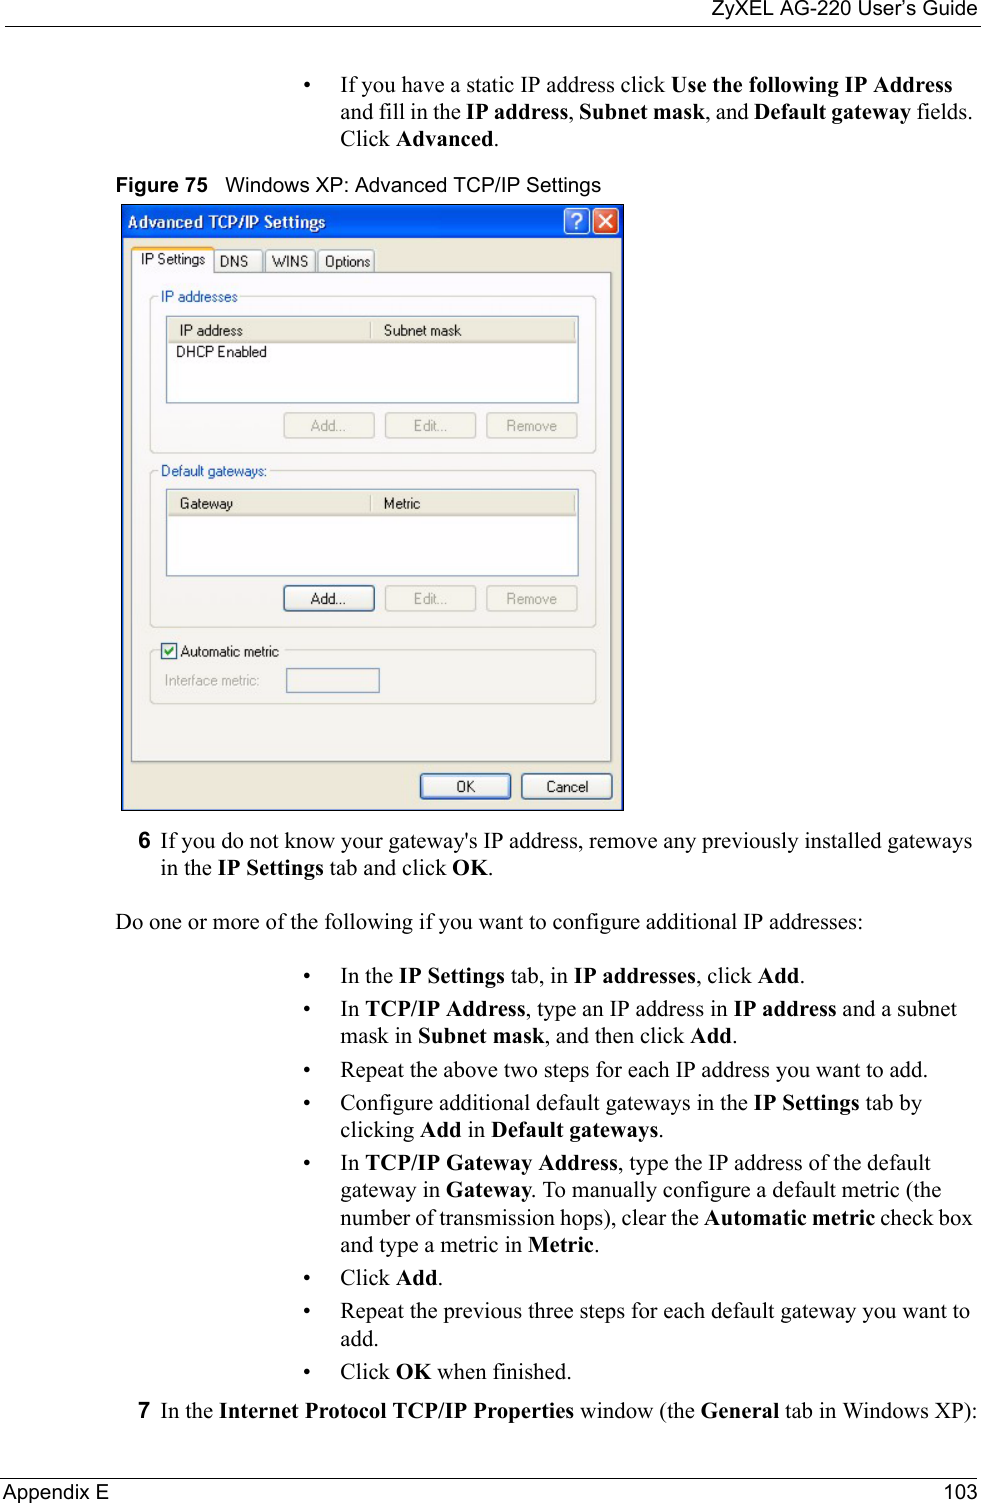 ZyXEL AG-220 User’s GuideAppendix E 103• If you have a static IP address click Use the following IP Address and fill in the IP address, Subnet mask, and Default gateway fields. Click Advanced.Figure 75   Windows XP: Advanced TCP/IP Settings6If you do not know your gateway&apos;s IP address, remove any previously installed gateways in the IP Settings tab and click OK.Do one or more of the following if you want to configure additional IP addresses:•In the IP Settings tab, in IP addresses, click Add.•In TCP/IP Address, type an IP address in IP address and a subnet mask in Subnet mask, and then click Add.• Repeat the above two steps for each IP address you want to add.• Configure additional default gateways in the IP Settings tab by clicking Add in Default gateways.•In TCP/IP Gateway Address, type the IP address of the default gateway in Gateway. To manually configure a default metric (the number of transmission hops), clear the Automatic metric check box and type a metric in Metric.• Click Add. • Repeat the previous three steps for each default gateway you want to add.• Click OK when finished.7In the Internet Protocol TCP/IP Properties window (the General tab in Windows XP):